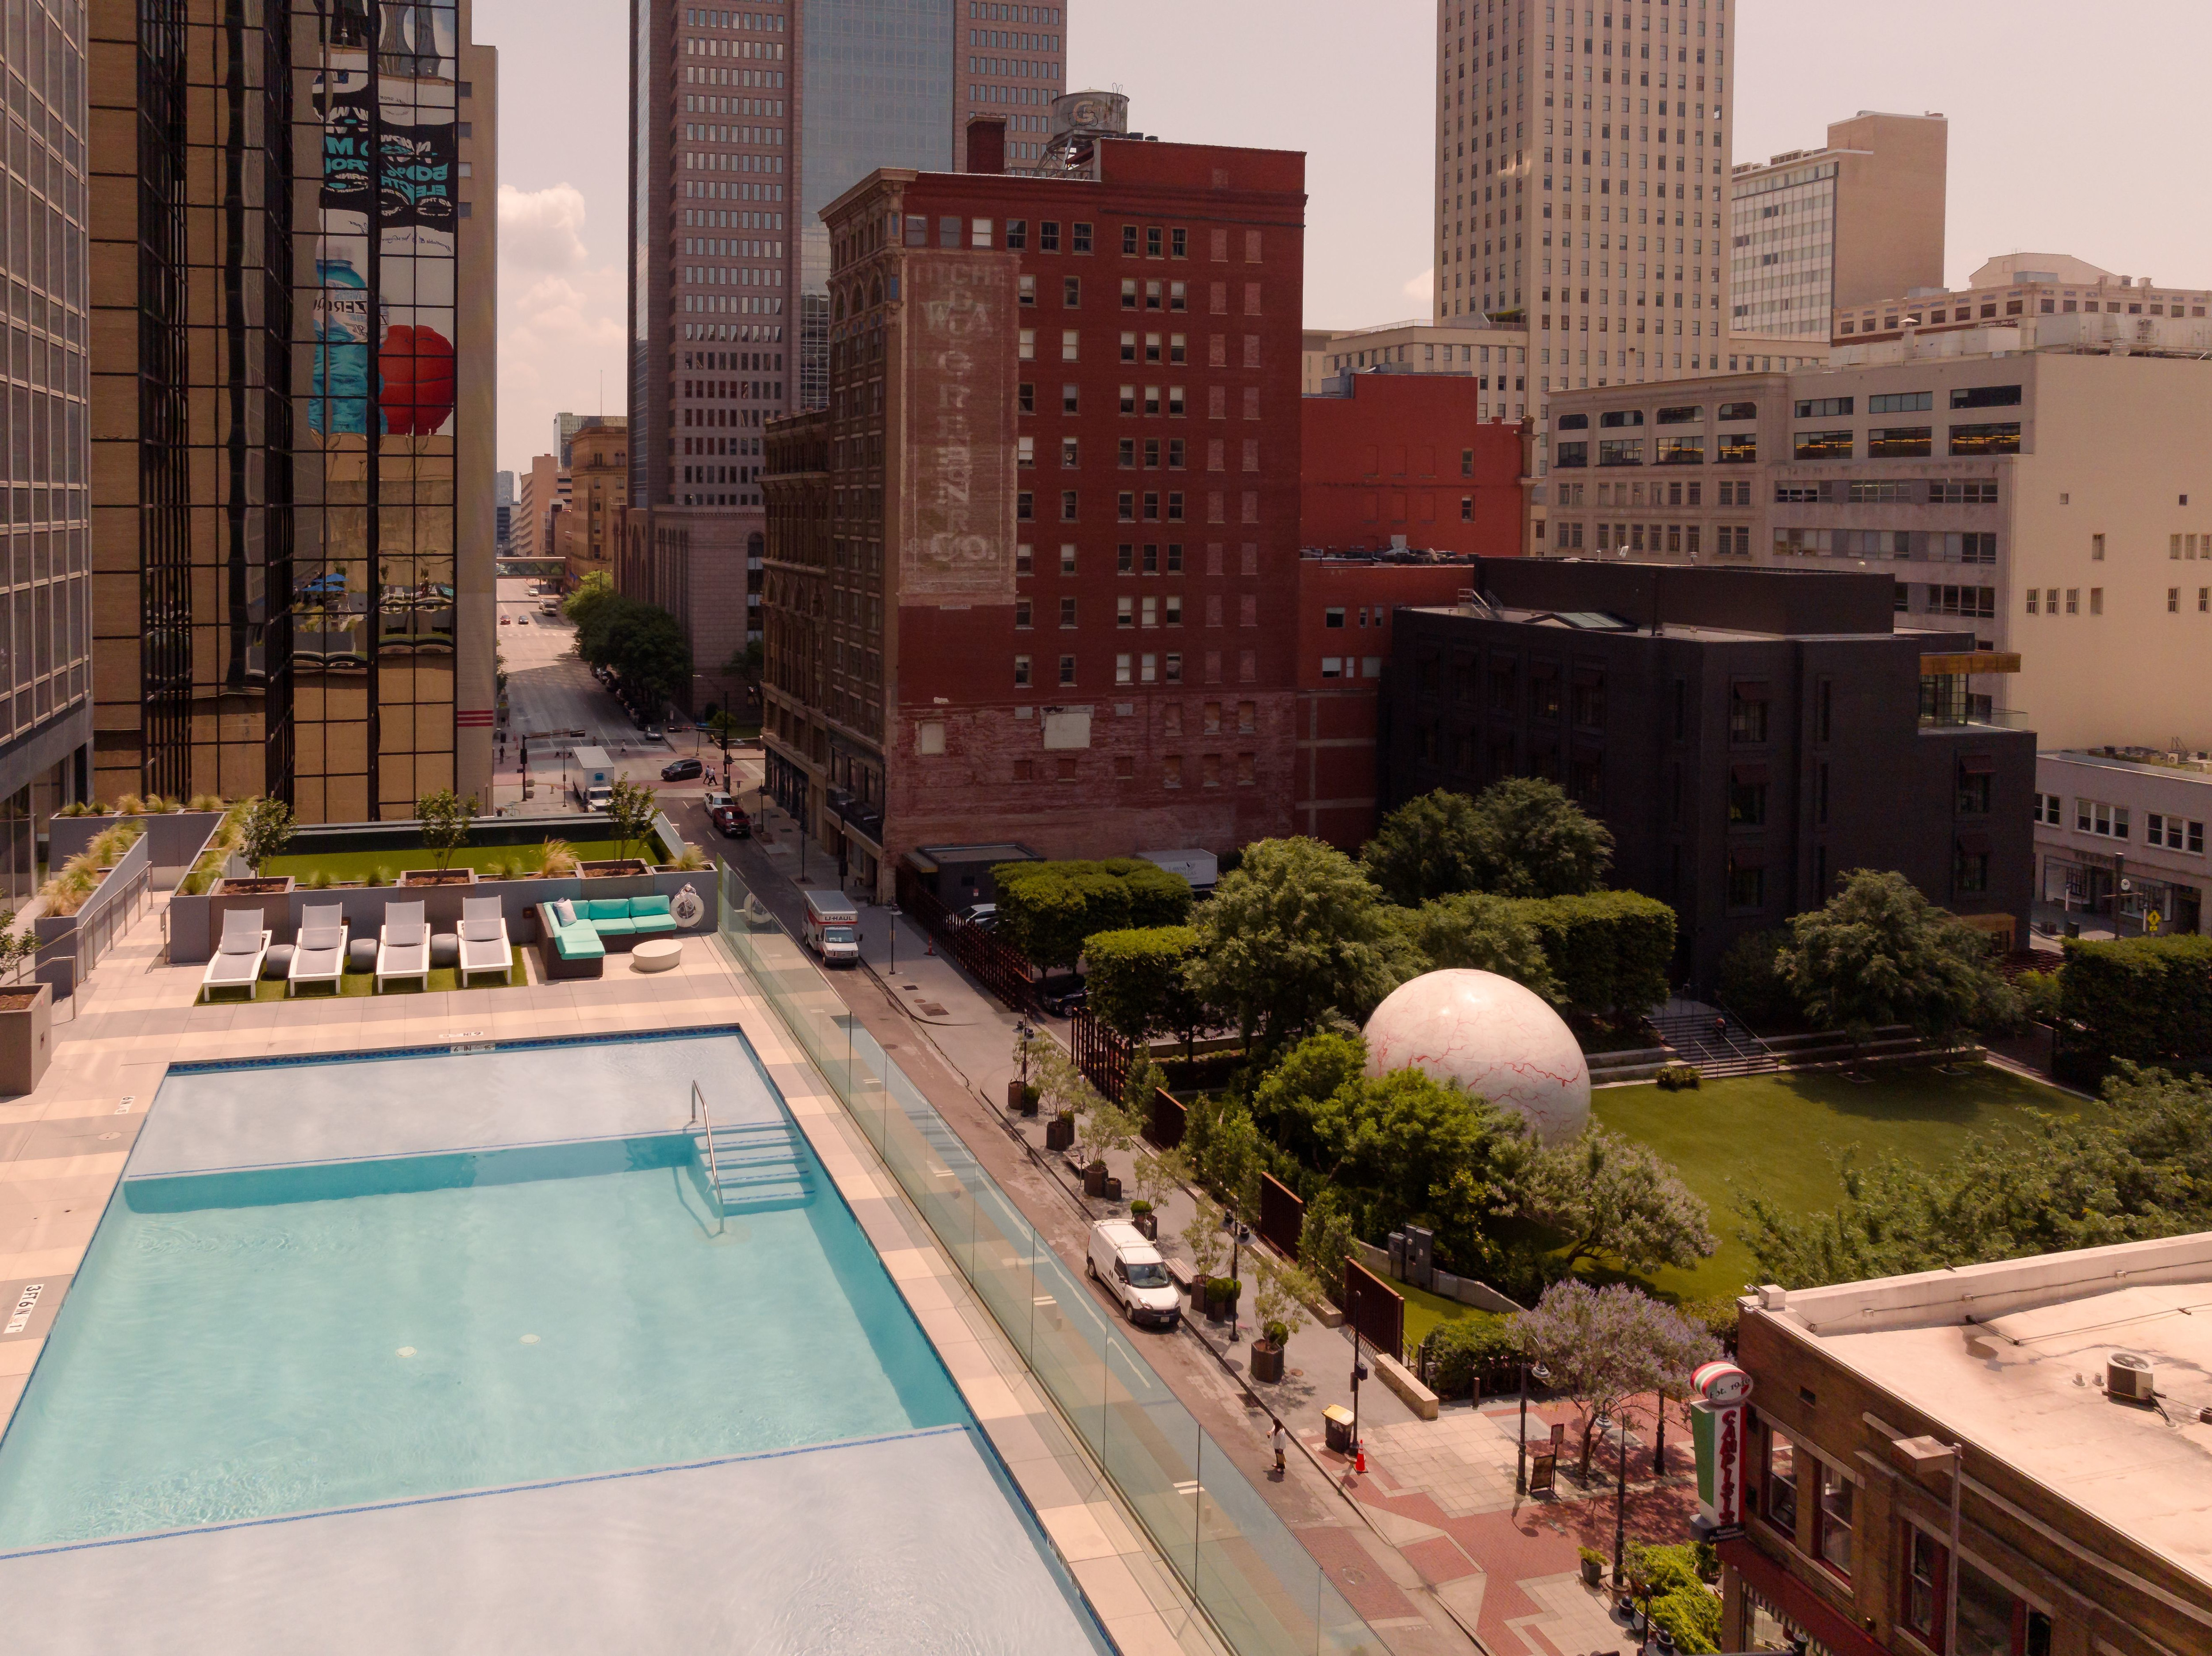 Overhead view of outdoor pool with surrounding buildings